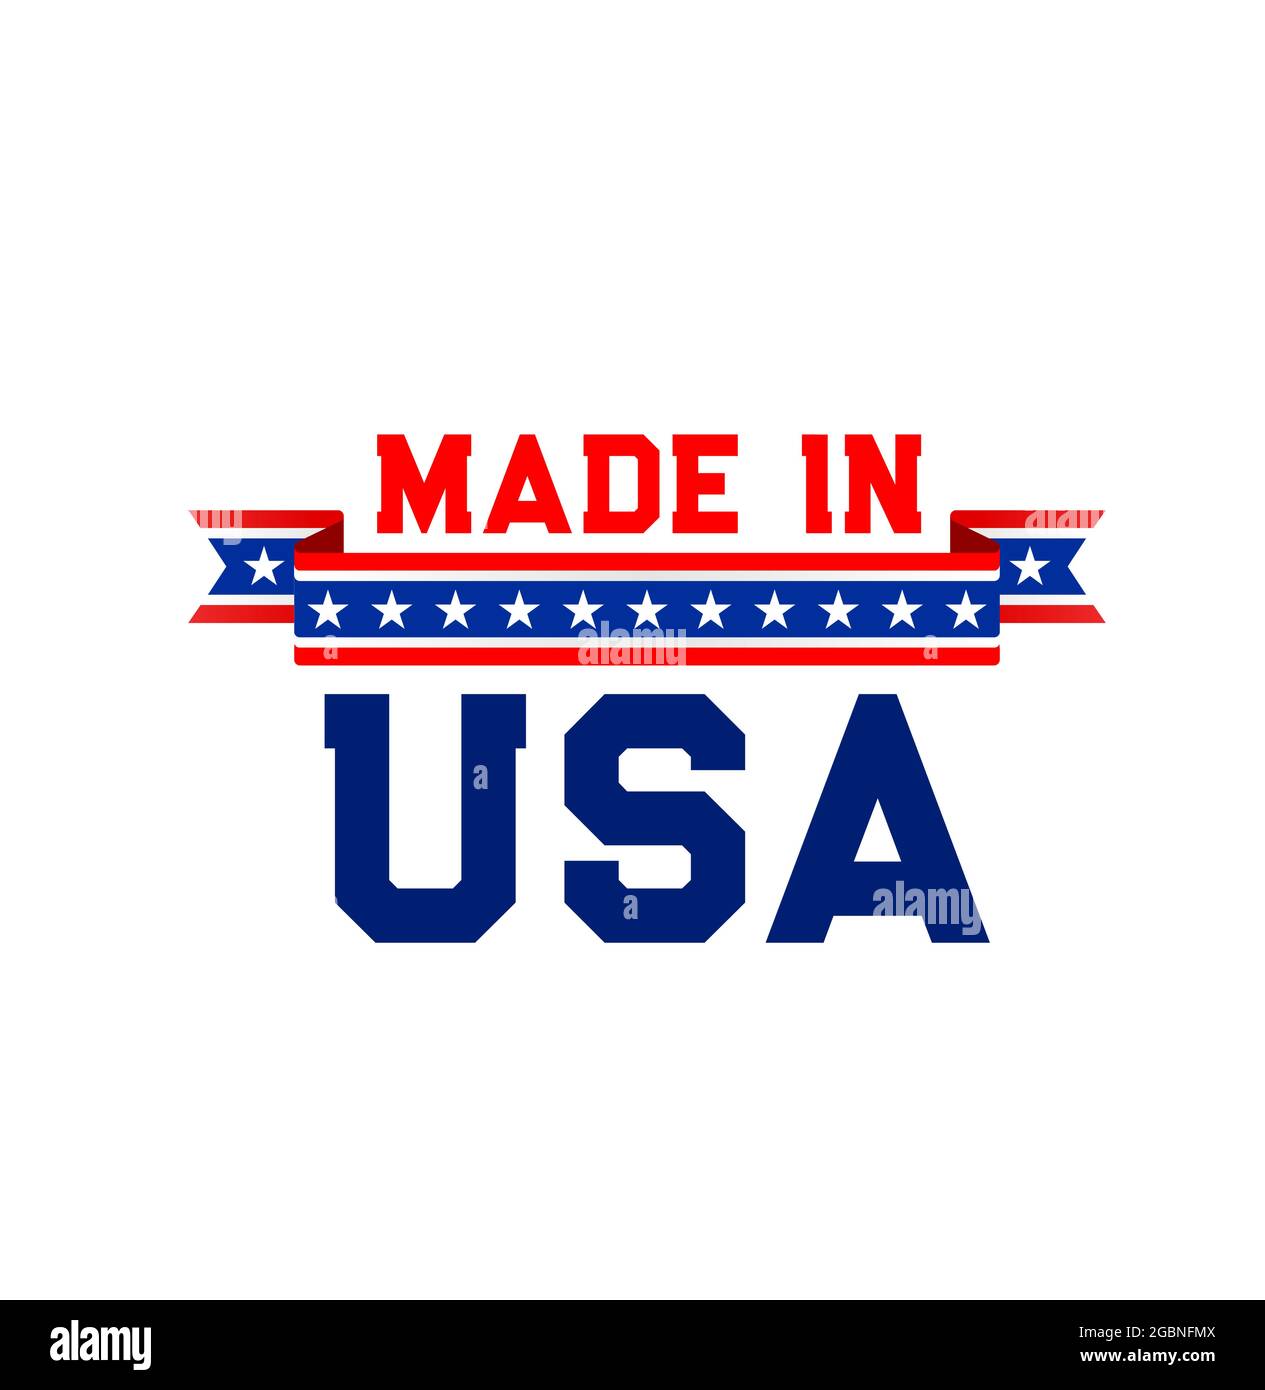 Made in USA label with vector ribbon in colors of United State flag. Blue, red, white stars and stripes ribbon banner with made in USA lettering, Amer Stock Vector